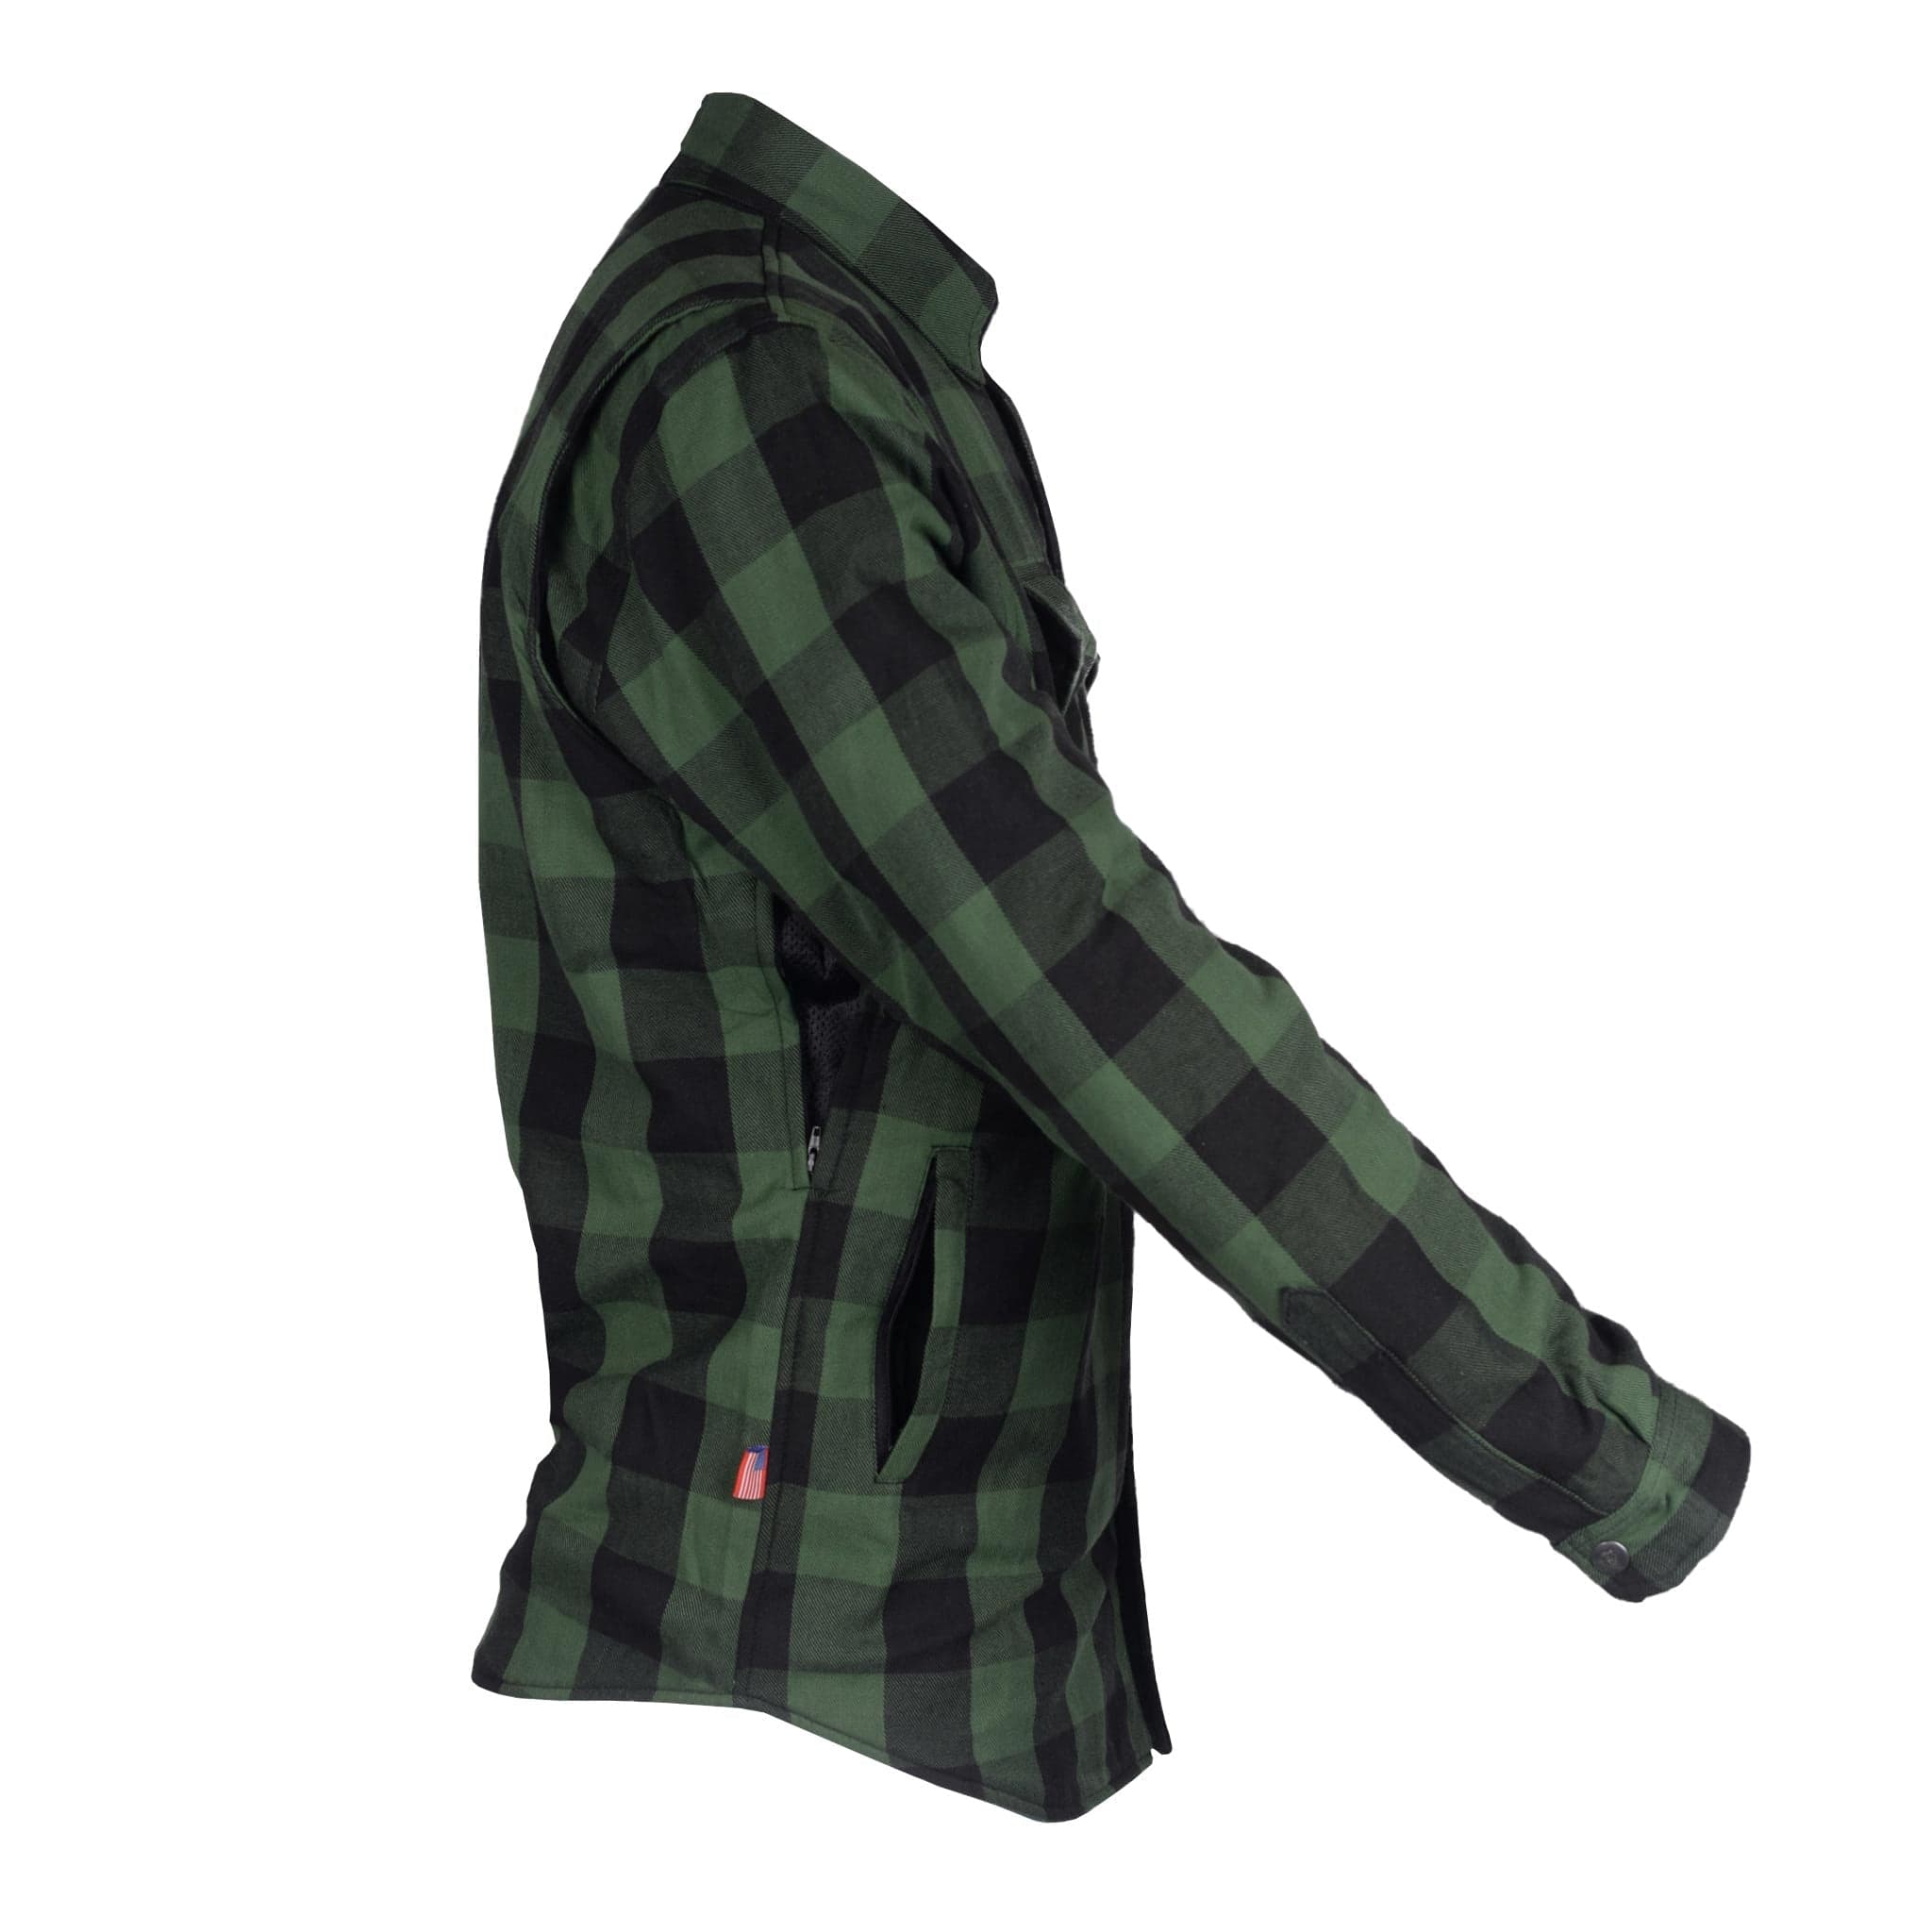 Protective Flannel Shirt "Forest Fury" - Green and Black